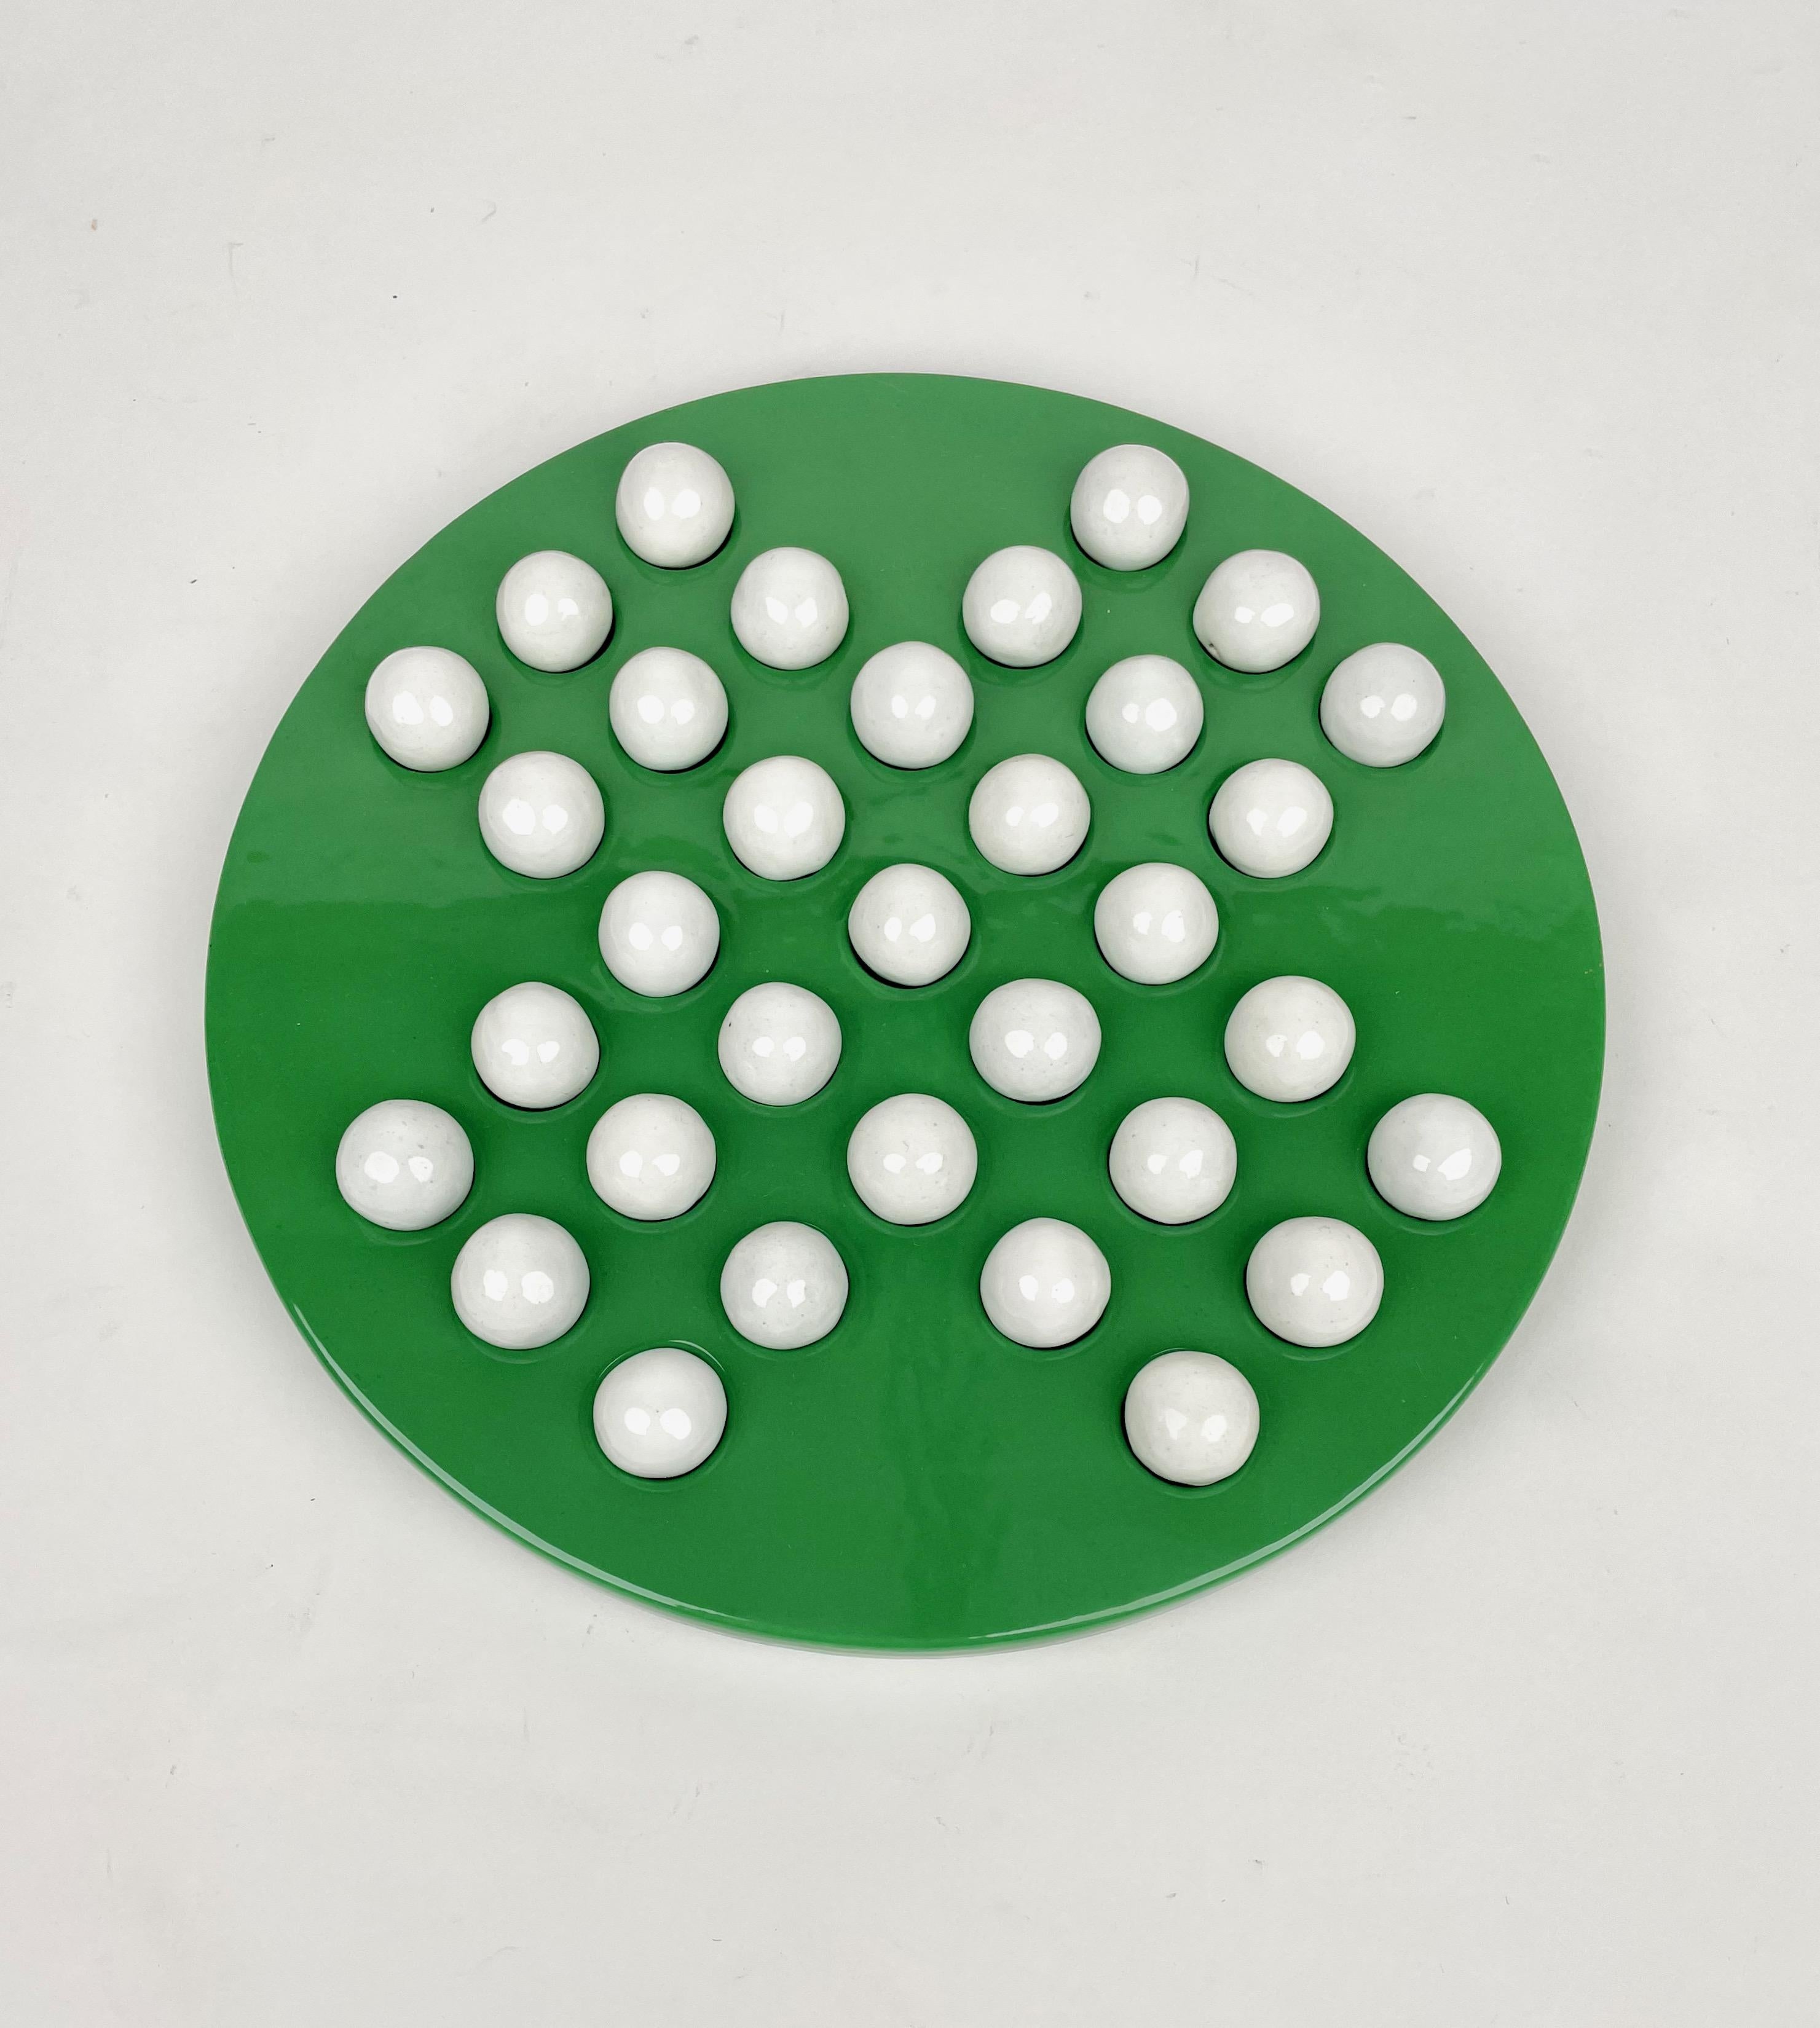 green and white checkers